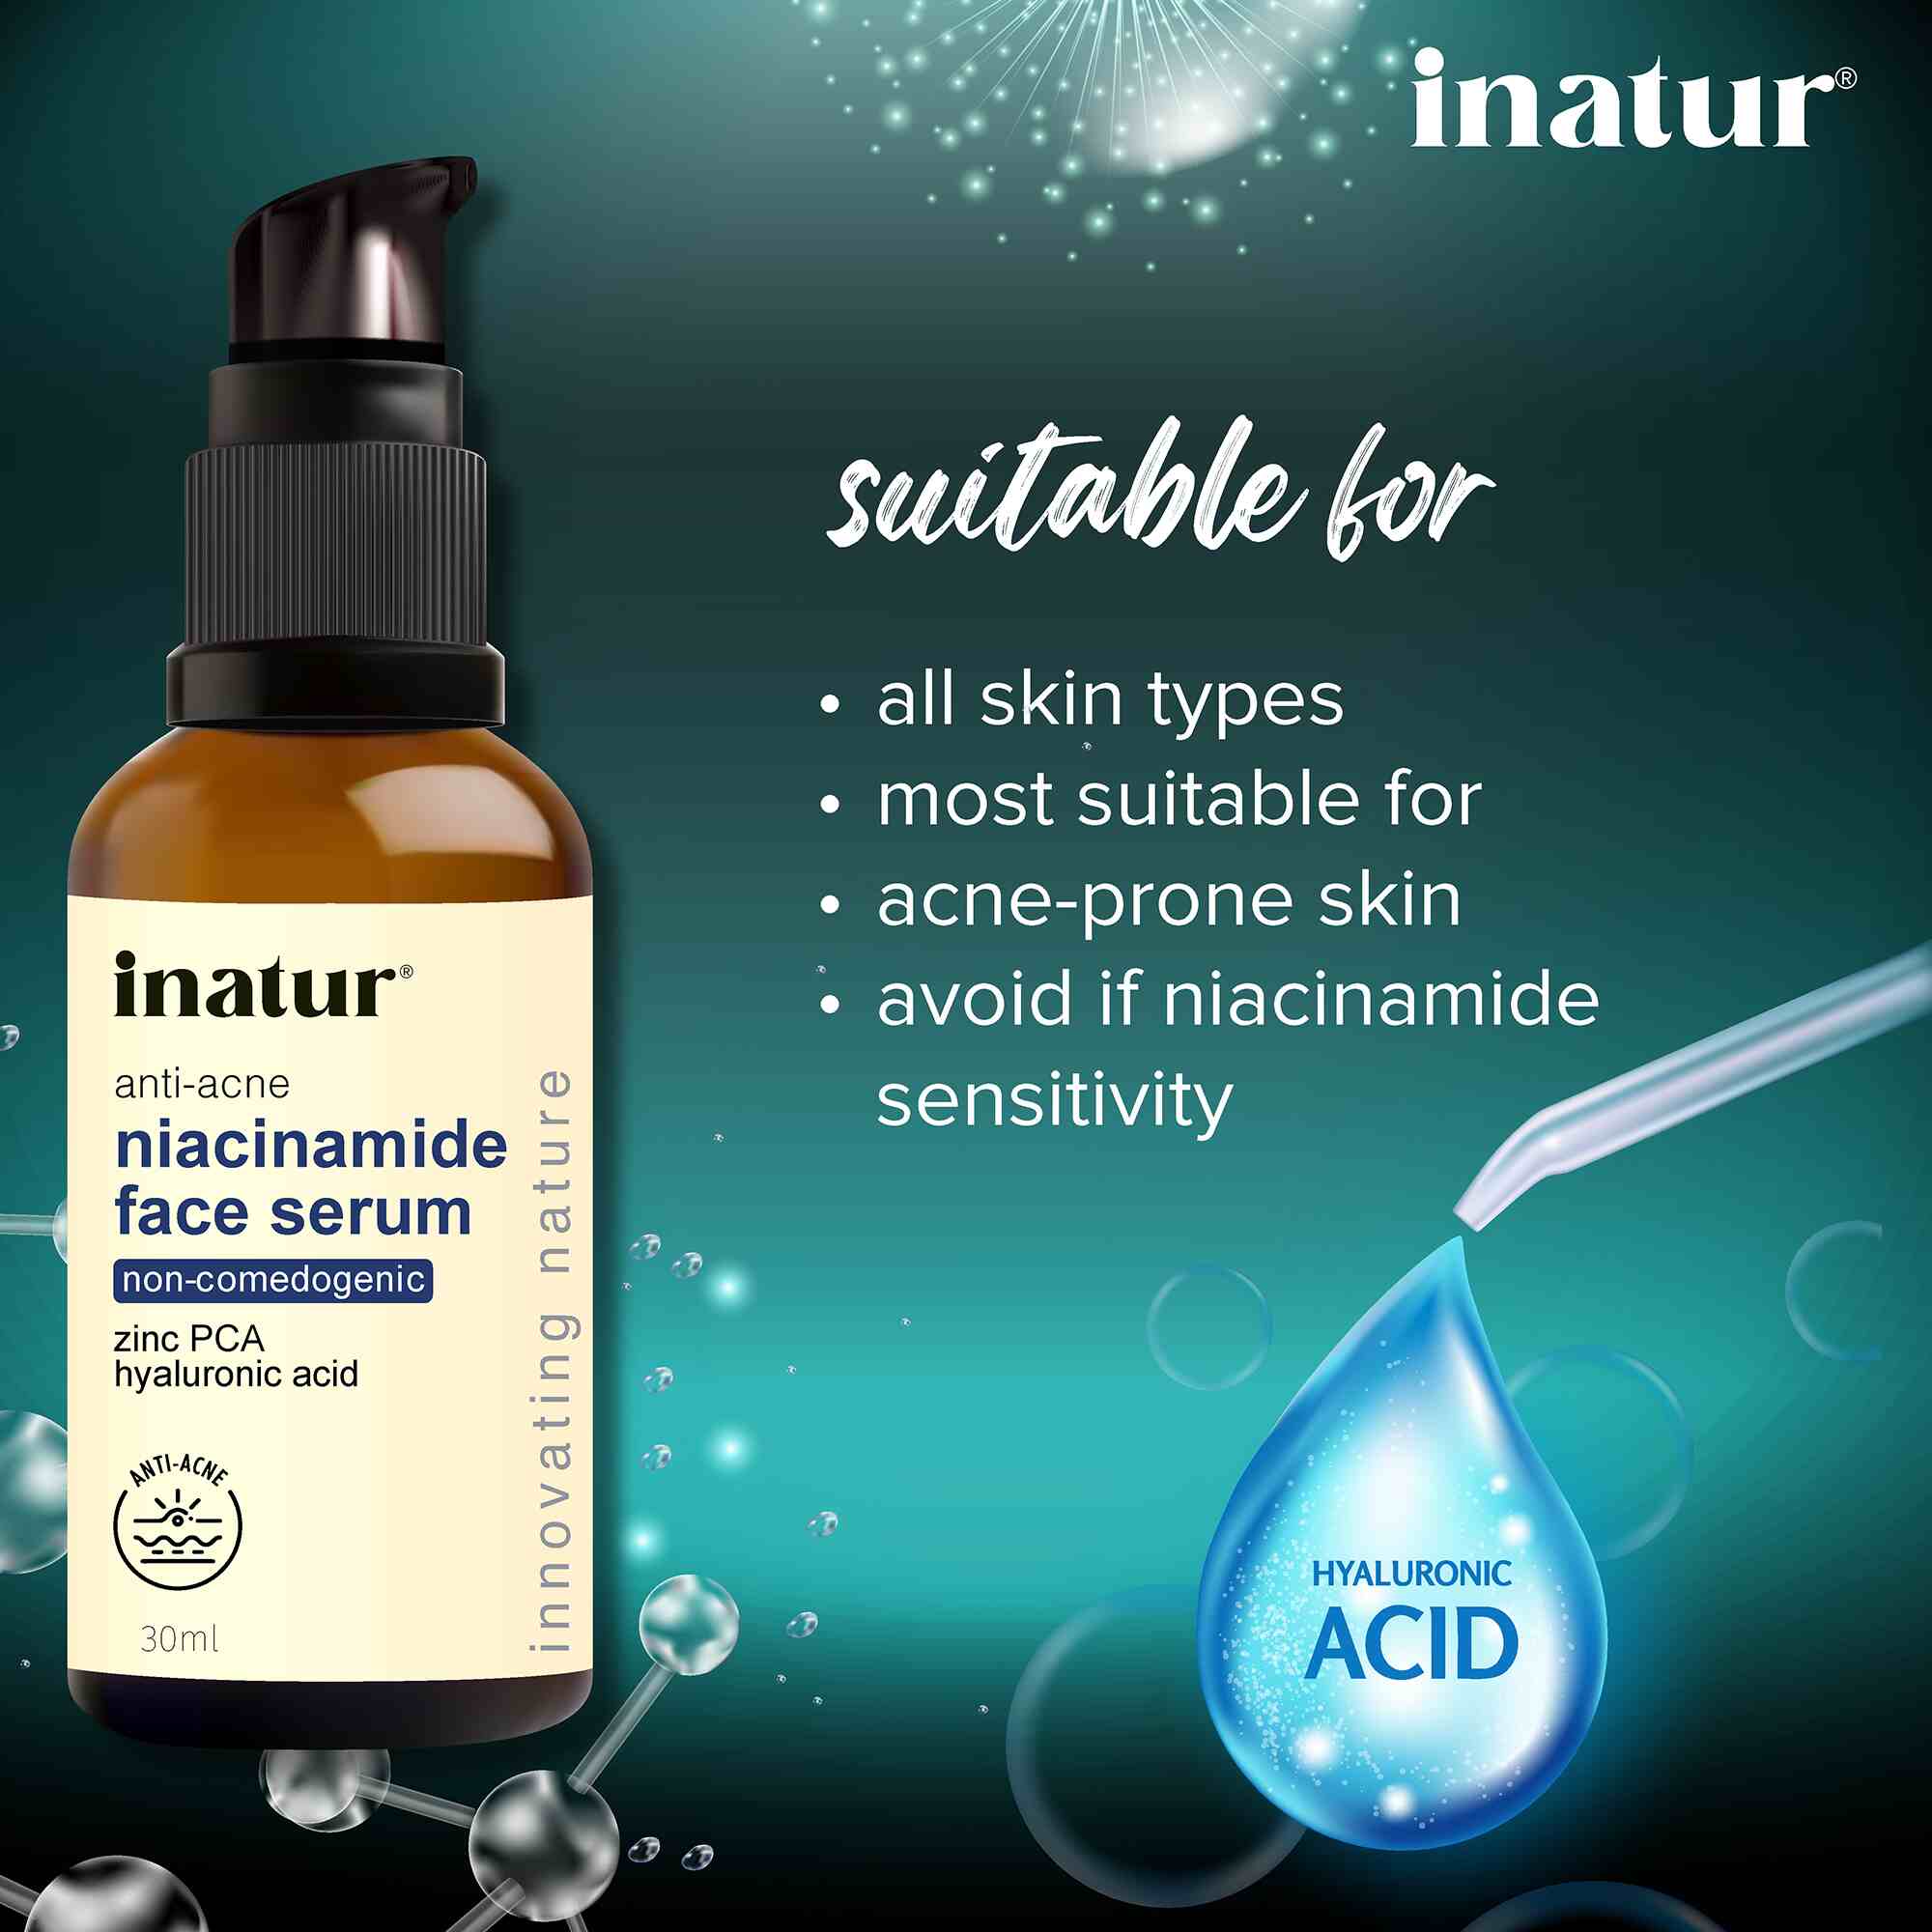 inatur niacinamide face serum is suitable for